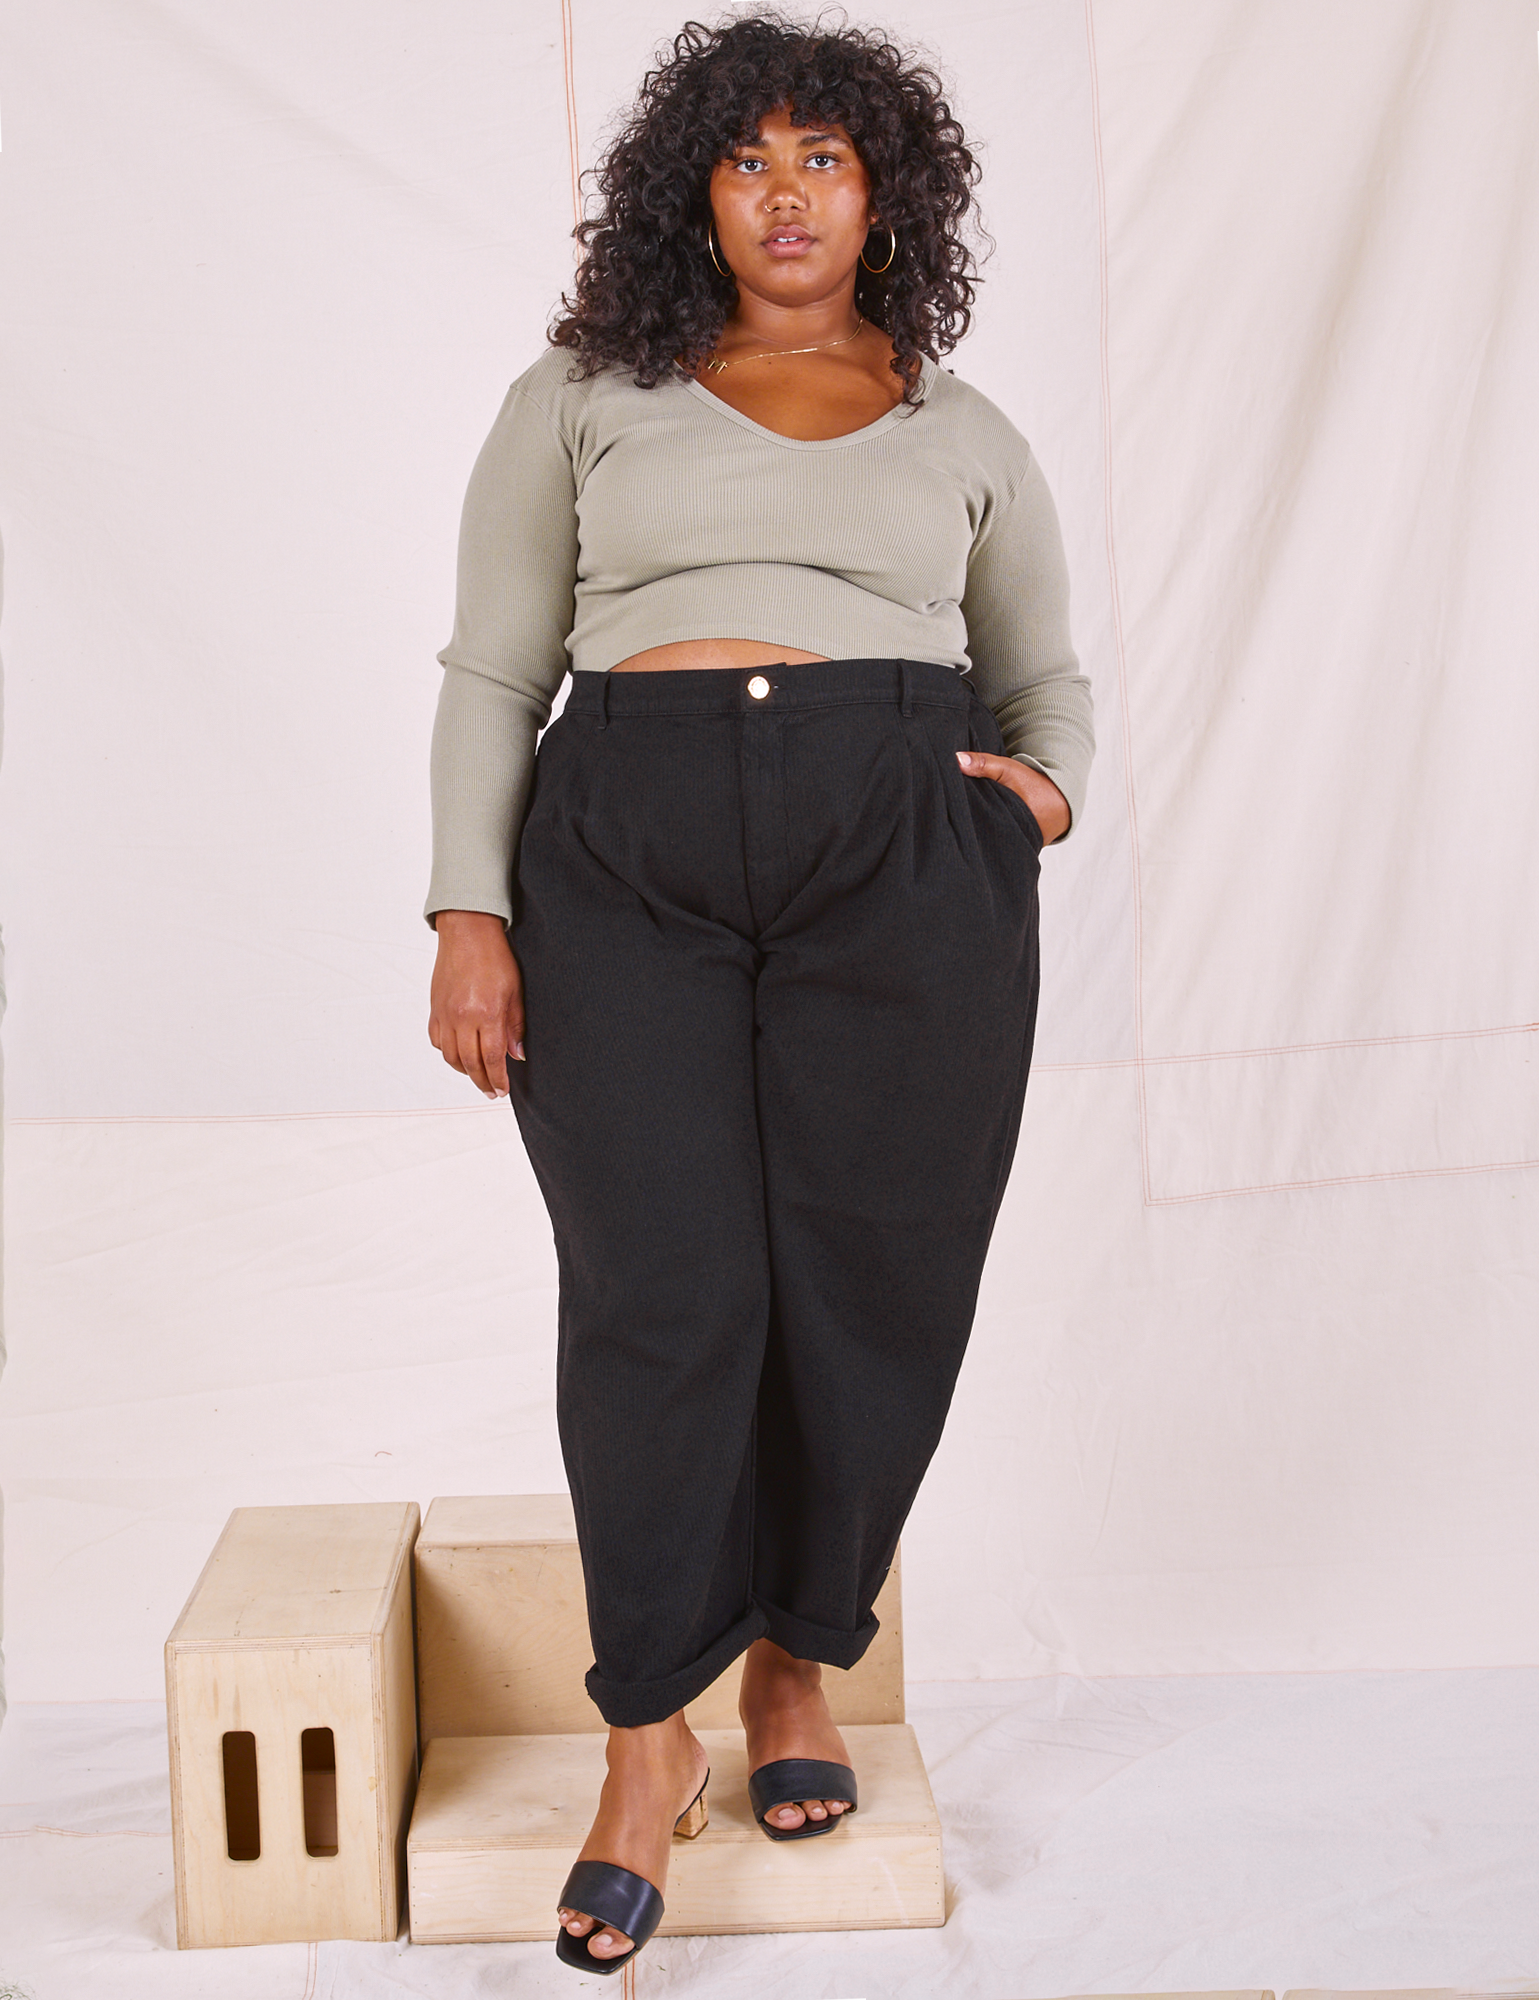 Morgan is 5&#39;5&quot; and wearing 1XL Heritage Trousers in Basic Black paired with khaki grey Long Sleeve V-Neck Tee